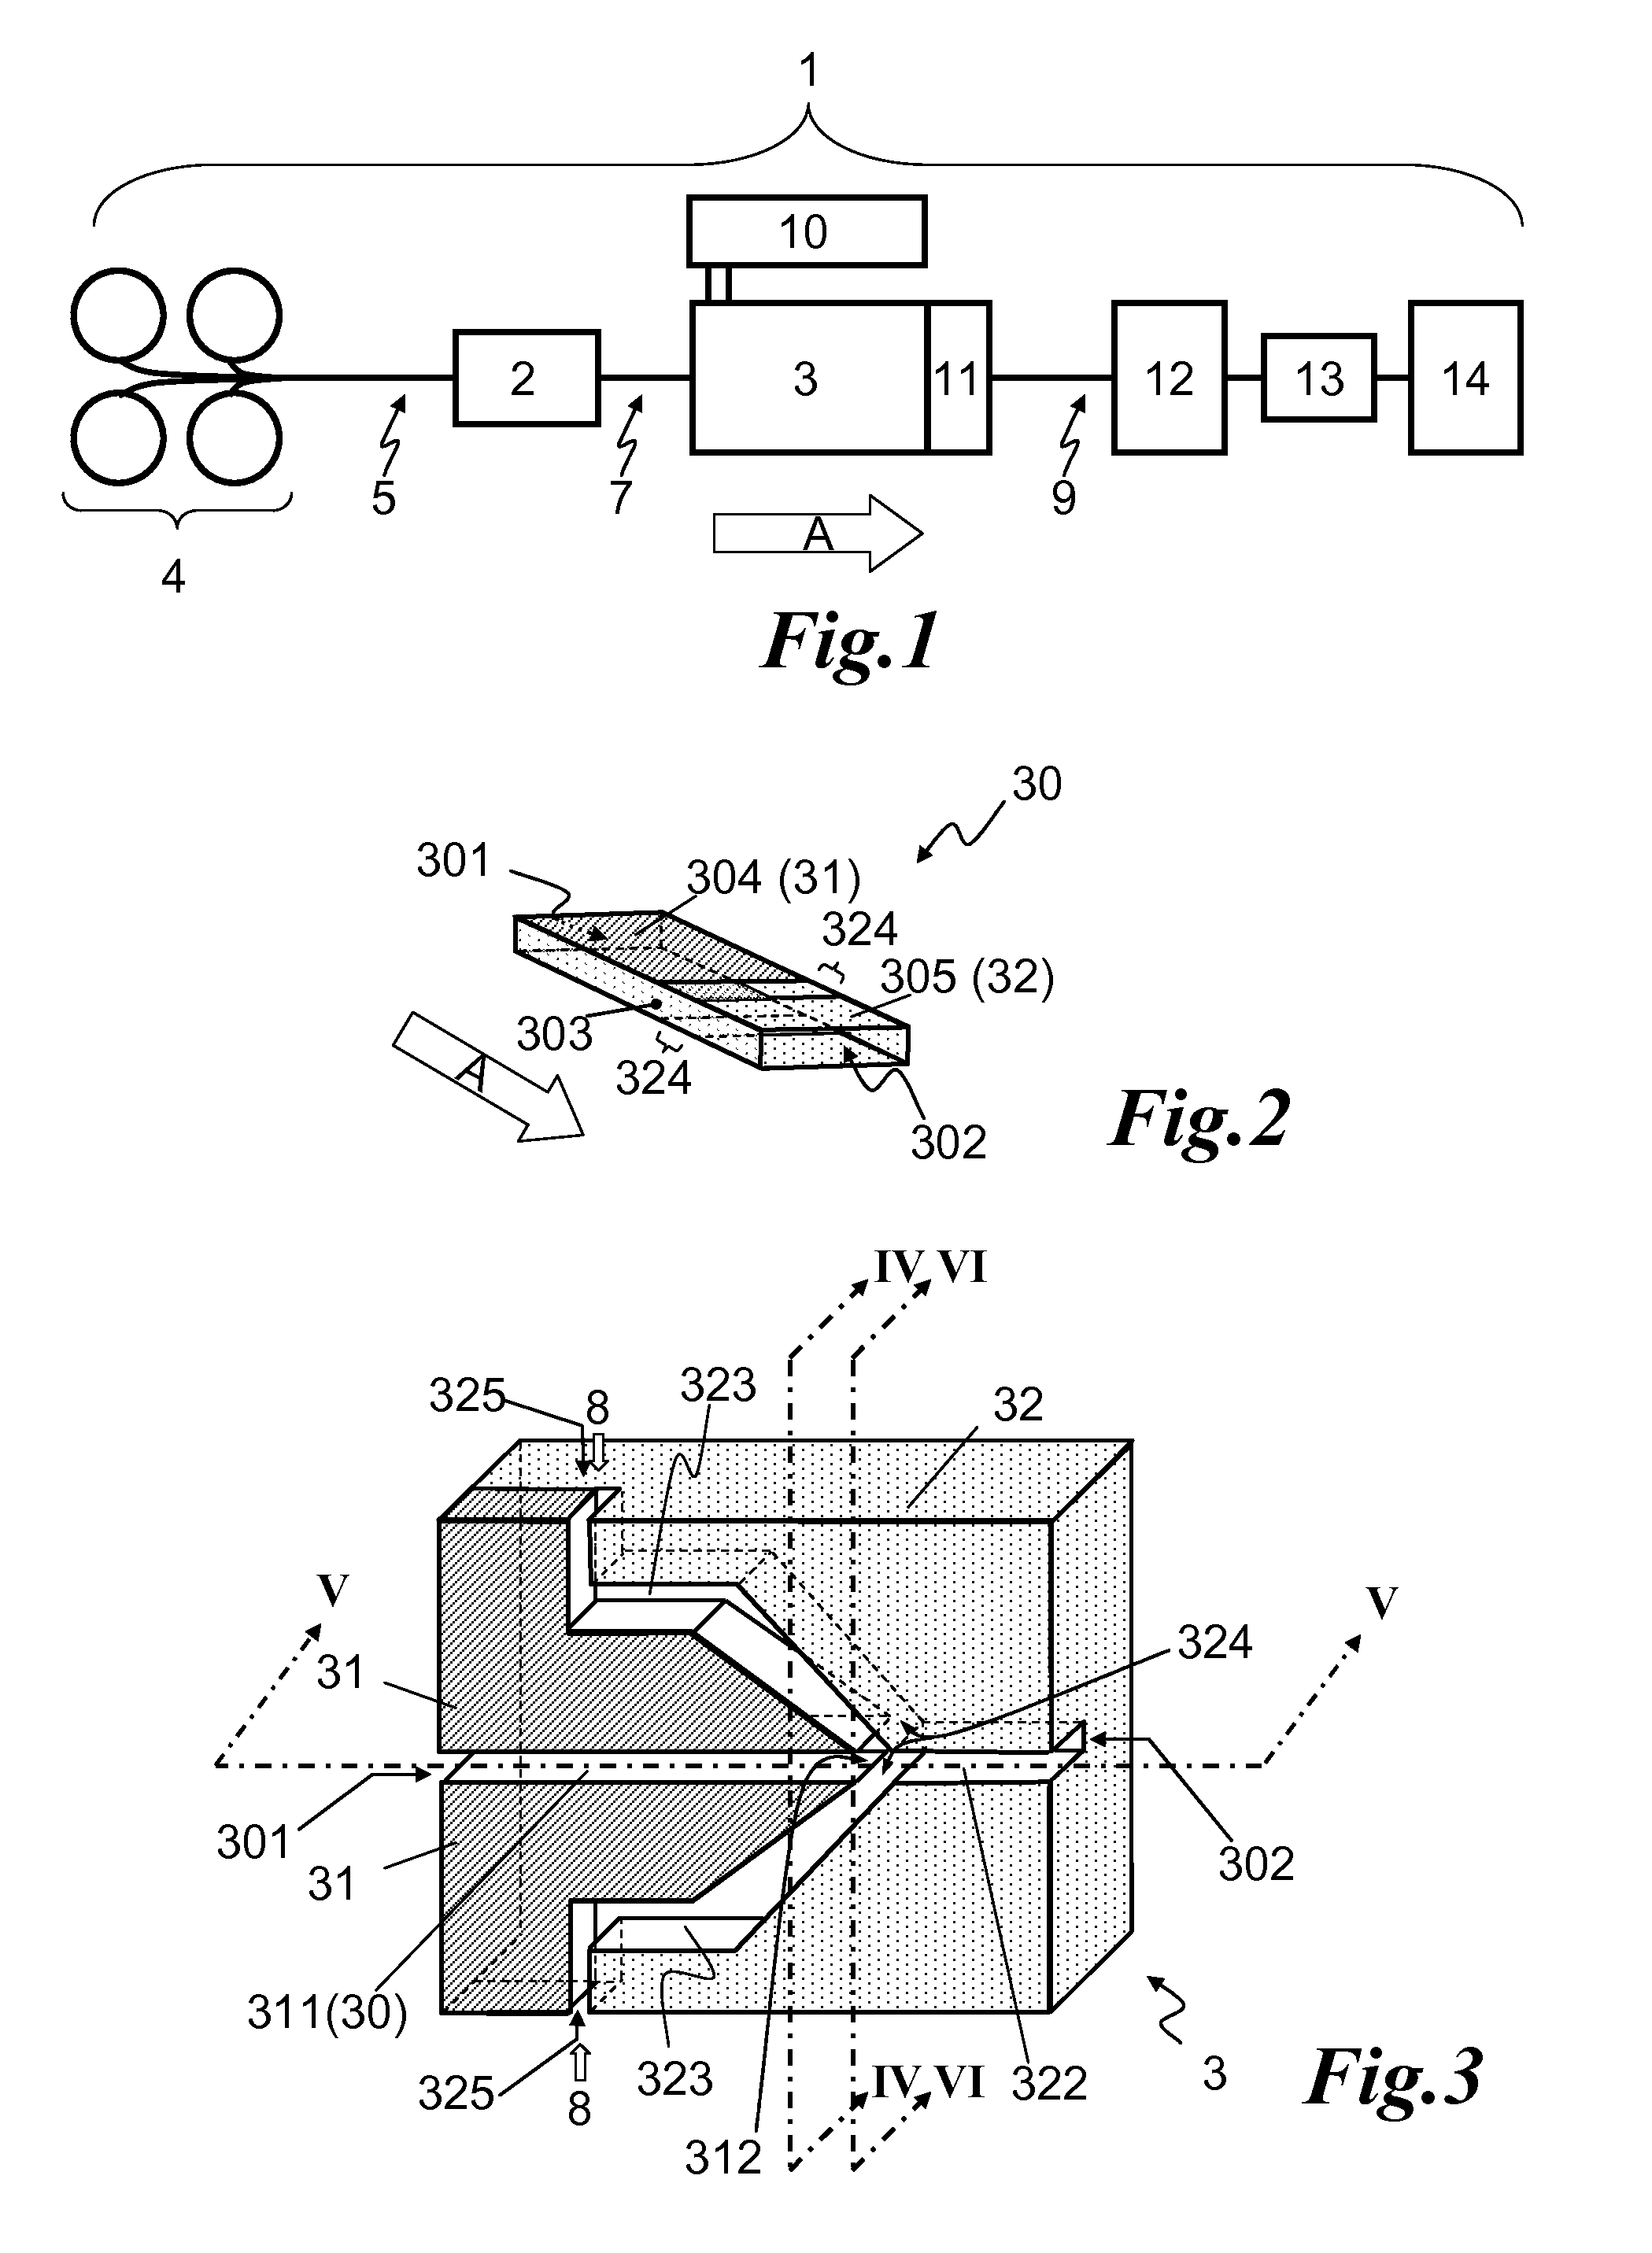 Impregnation Assembly and Method for Manufacturing a Composite Structure Reinforced with Long Fibers